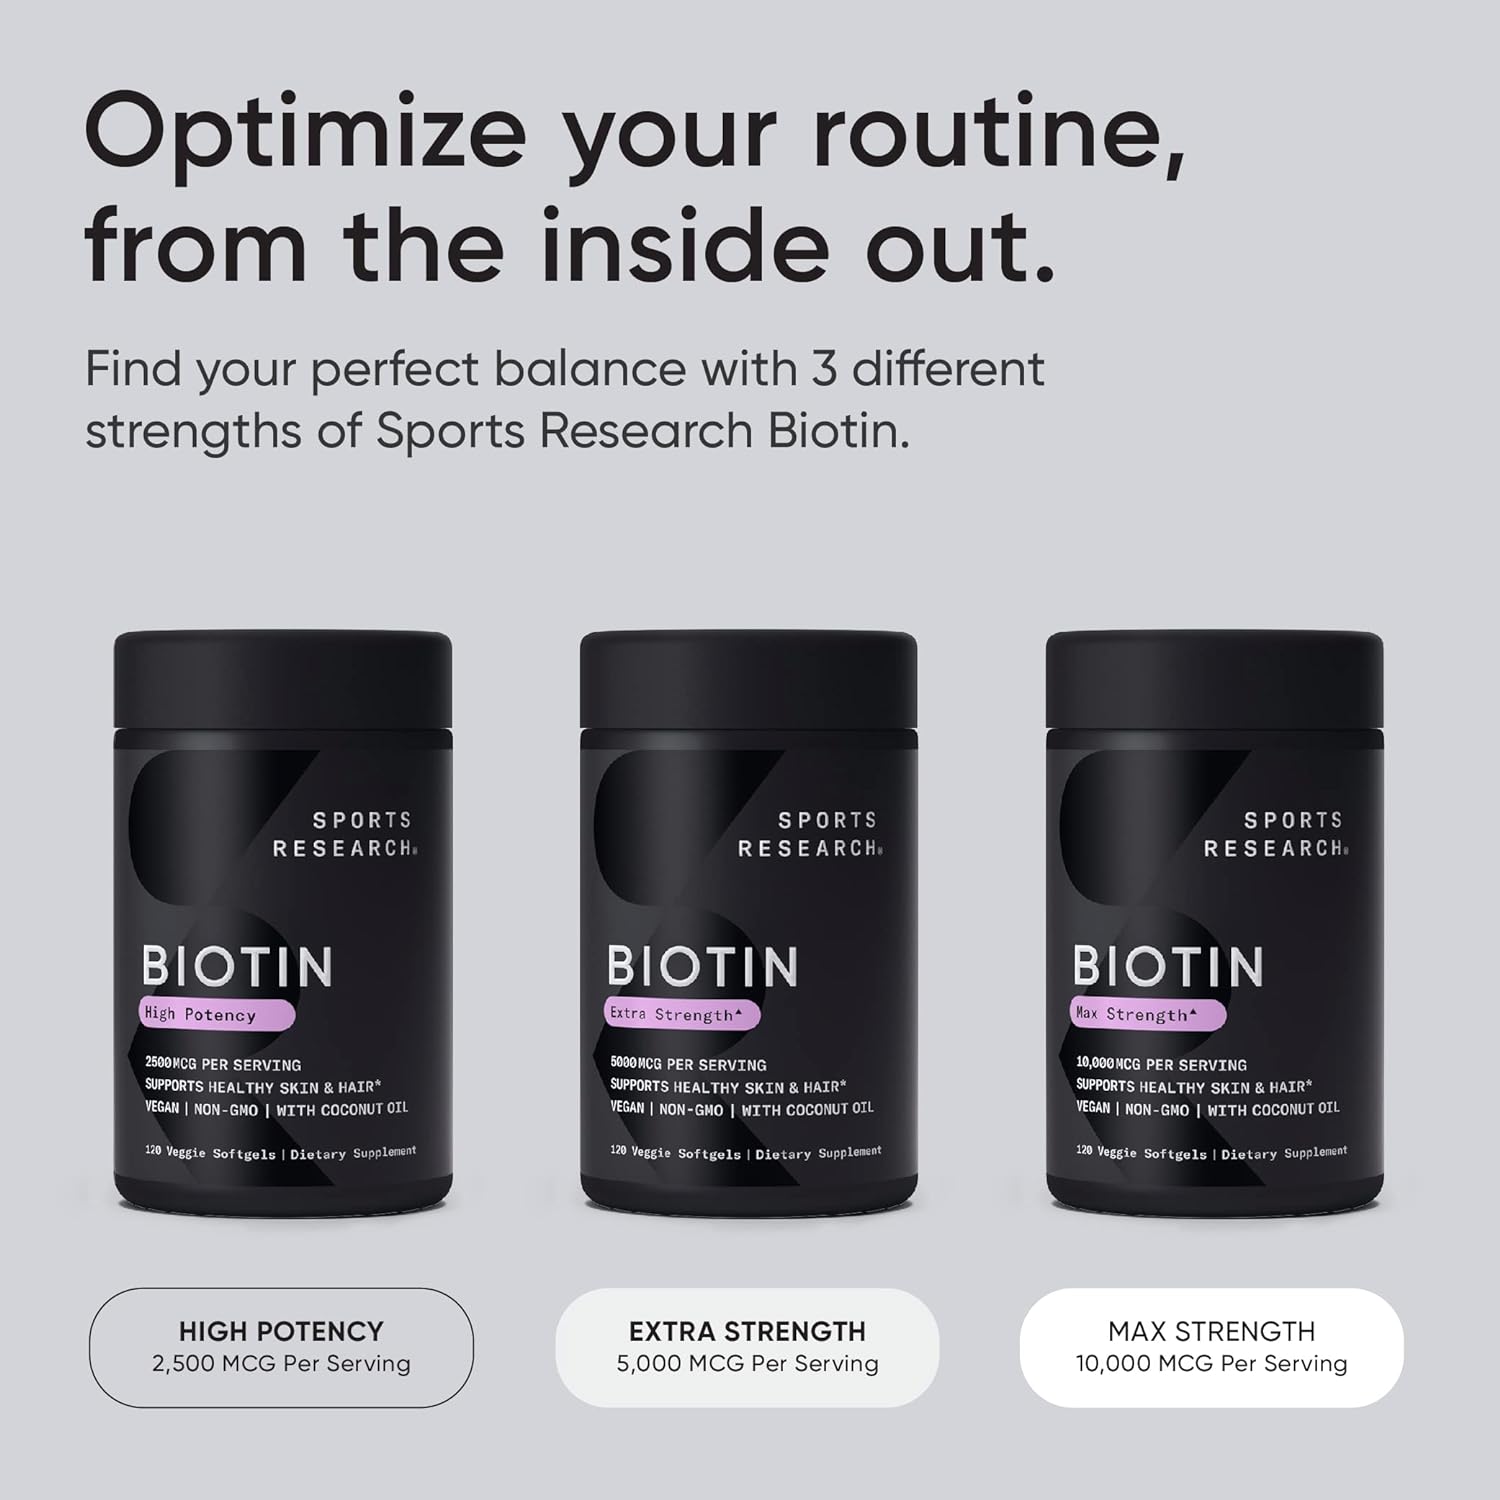 Sports Research Vegan Biotin 10,000mcg with Coconut Oil - Max Strength Biotin Vitamin B7 for Skin and Keratin Support - Non-GMO  Gluten Free, 120 Softgels (4 Month Supply)